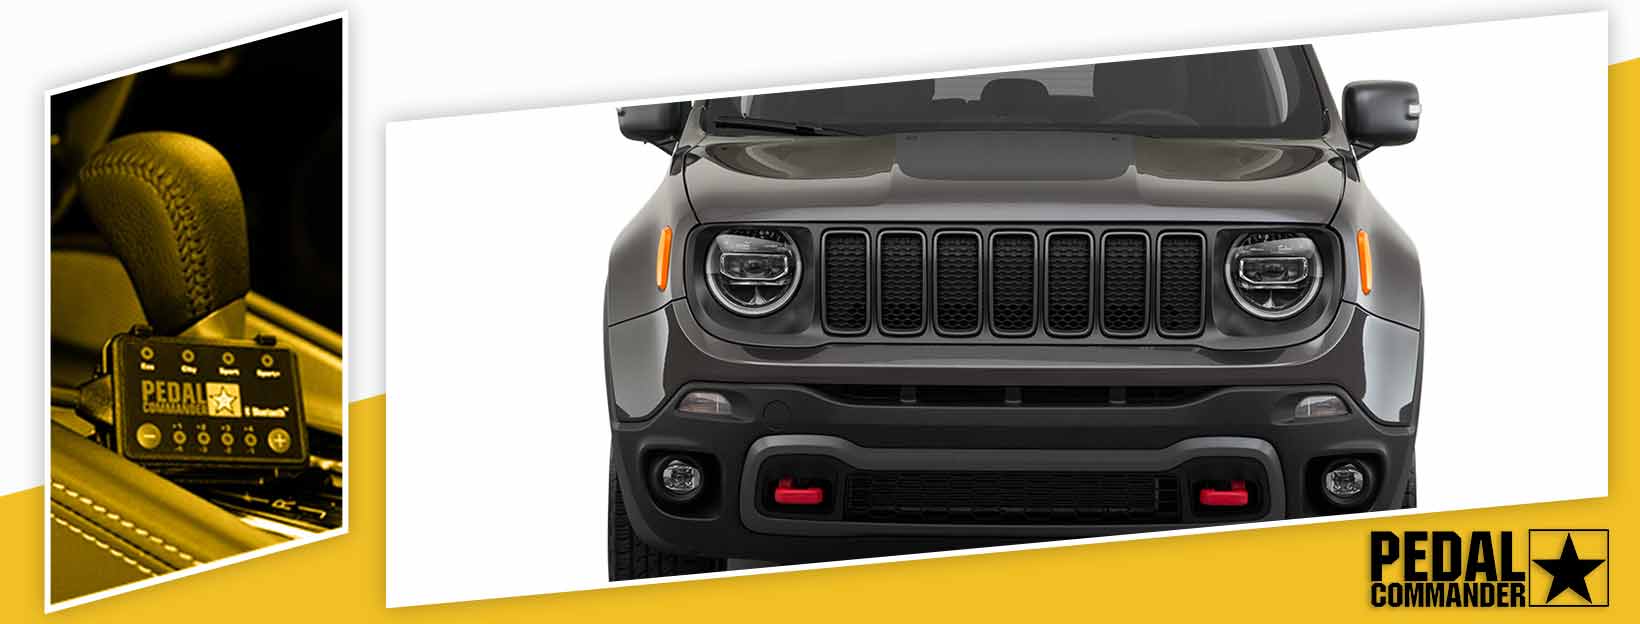 Pedal Commander for Jeep Renegade